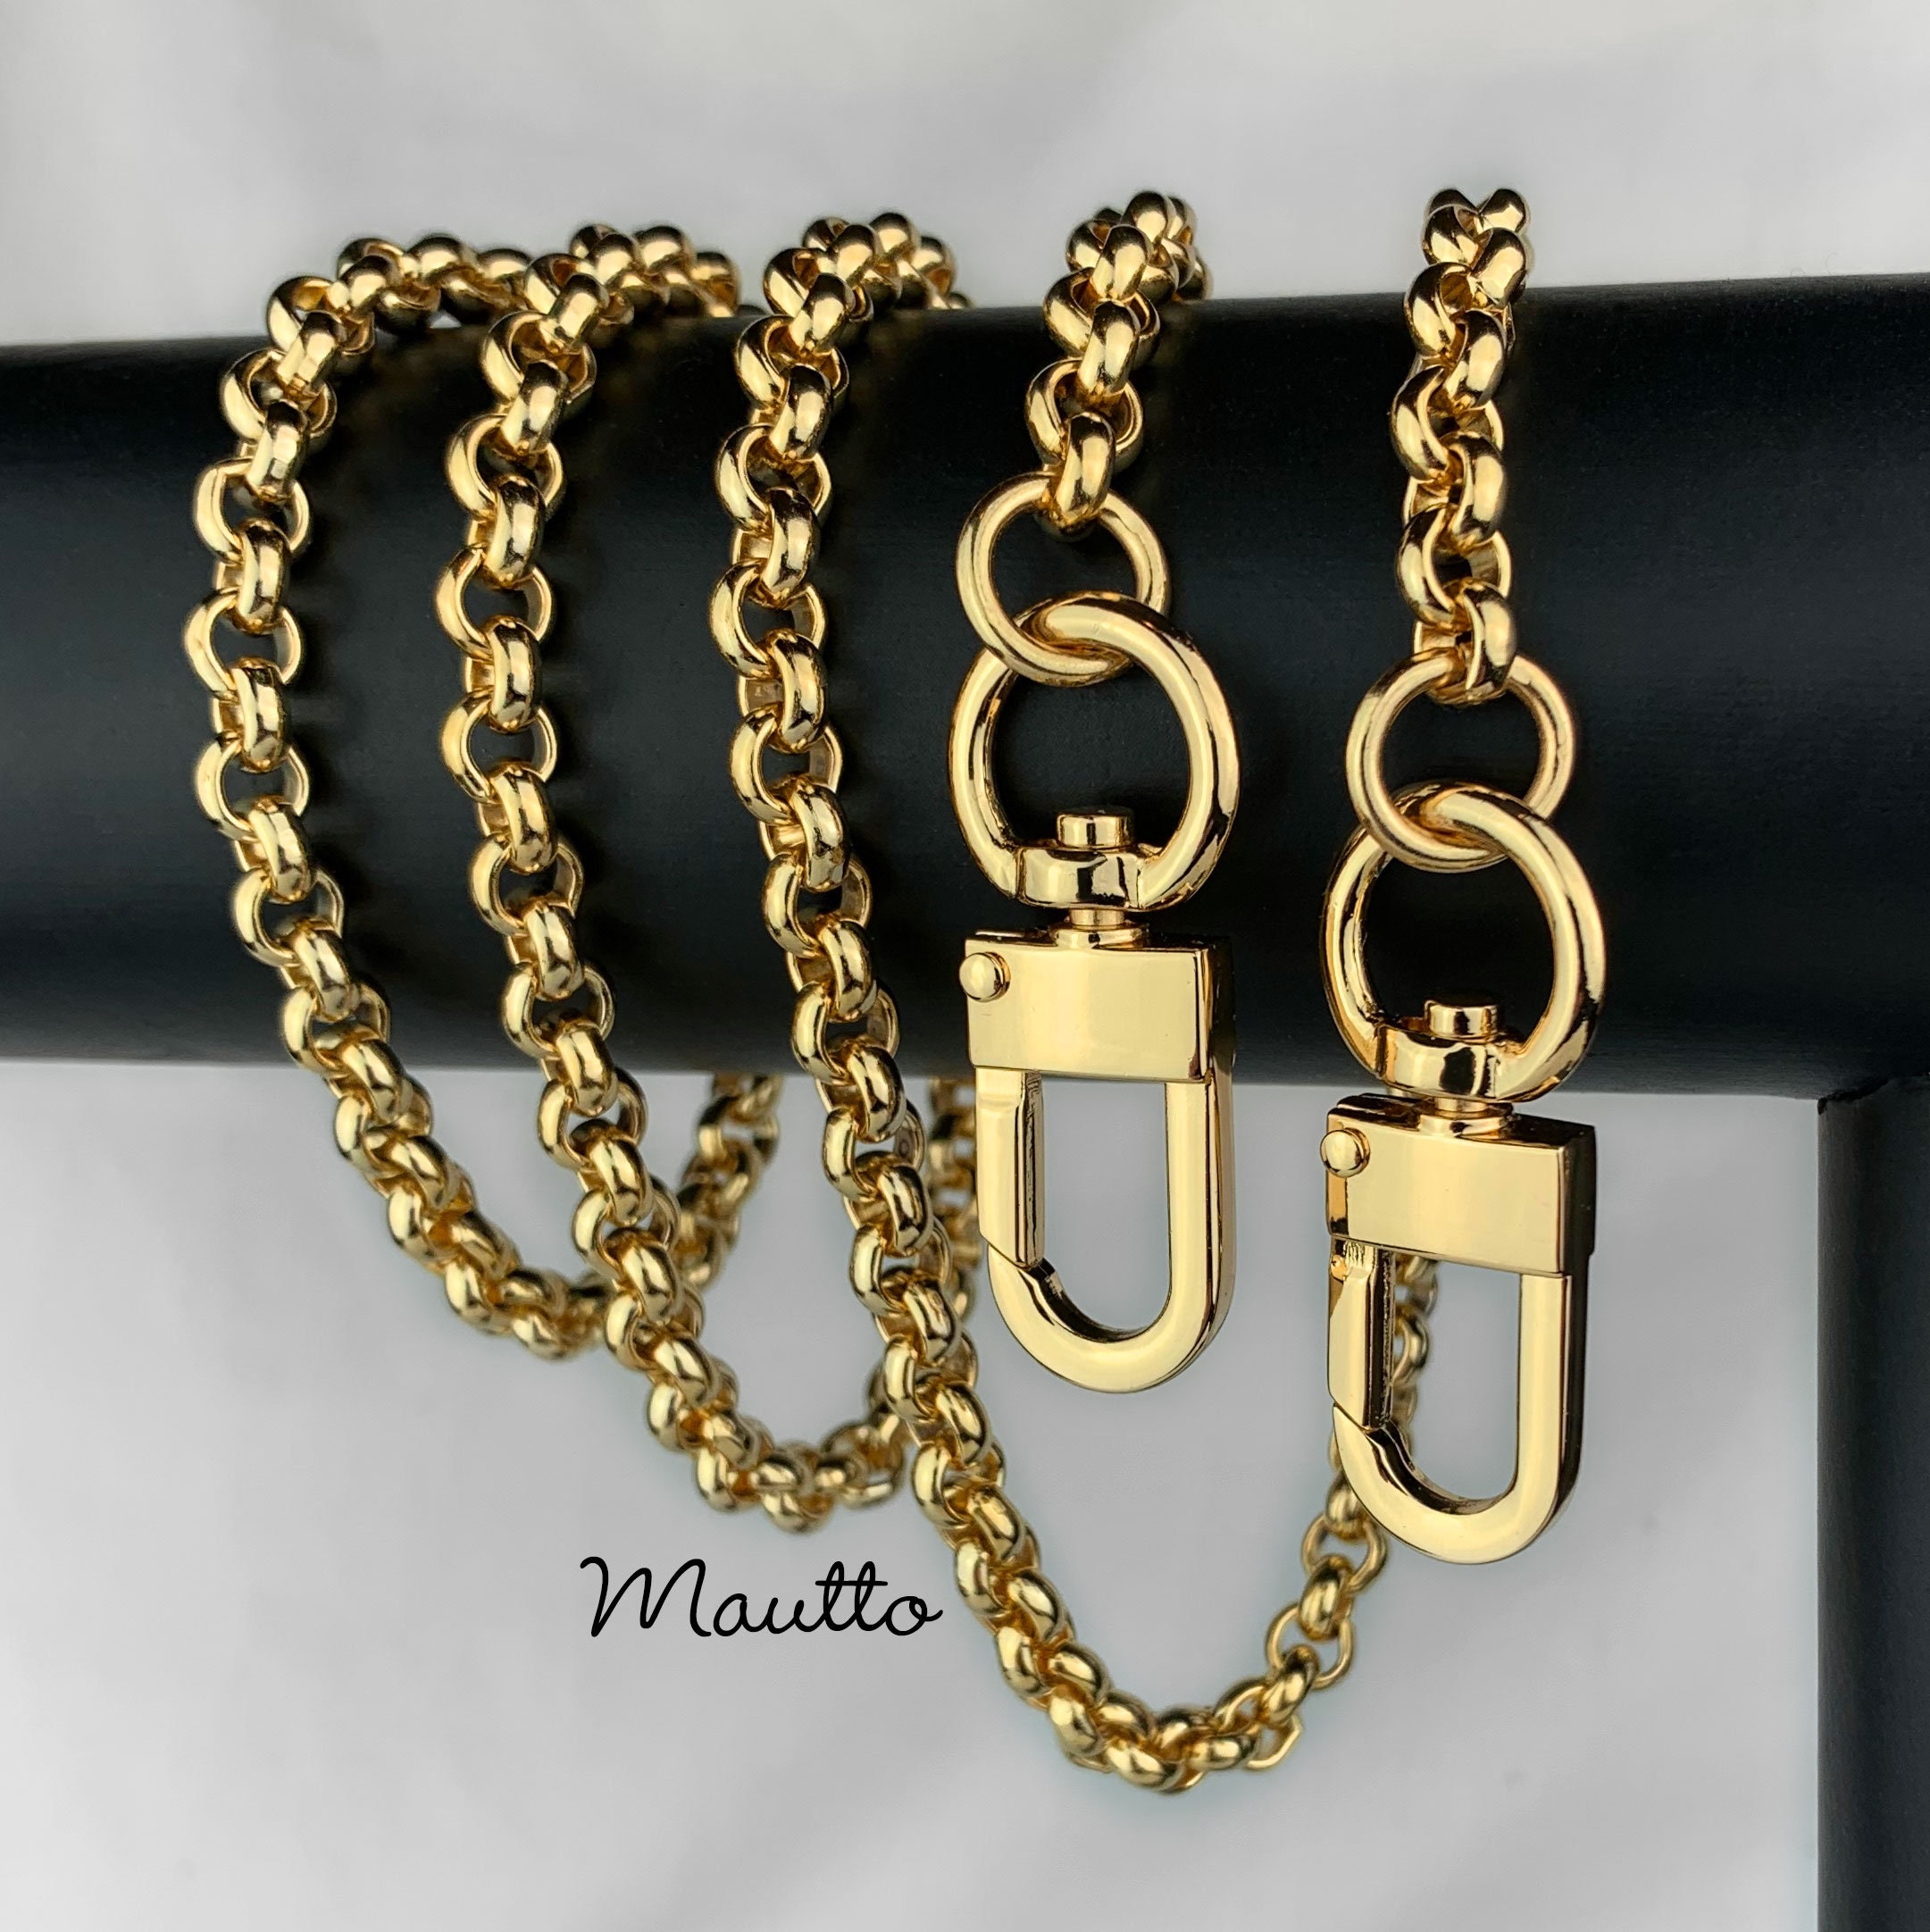 Classic Rolo Chain Strap for Bags/purses GOLD Luxury Chain 1/4 7mm Wide  Choose Length & Clasps 